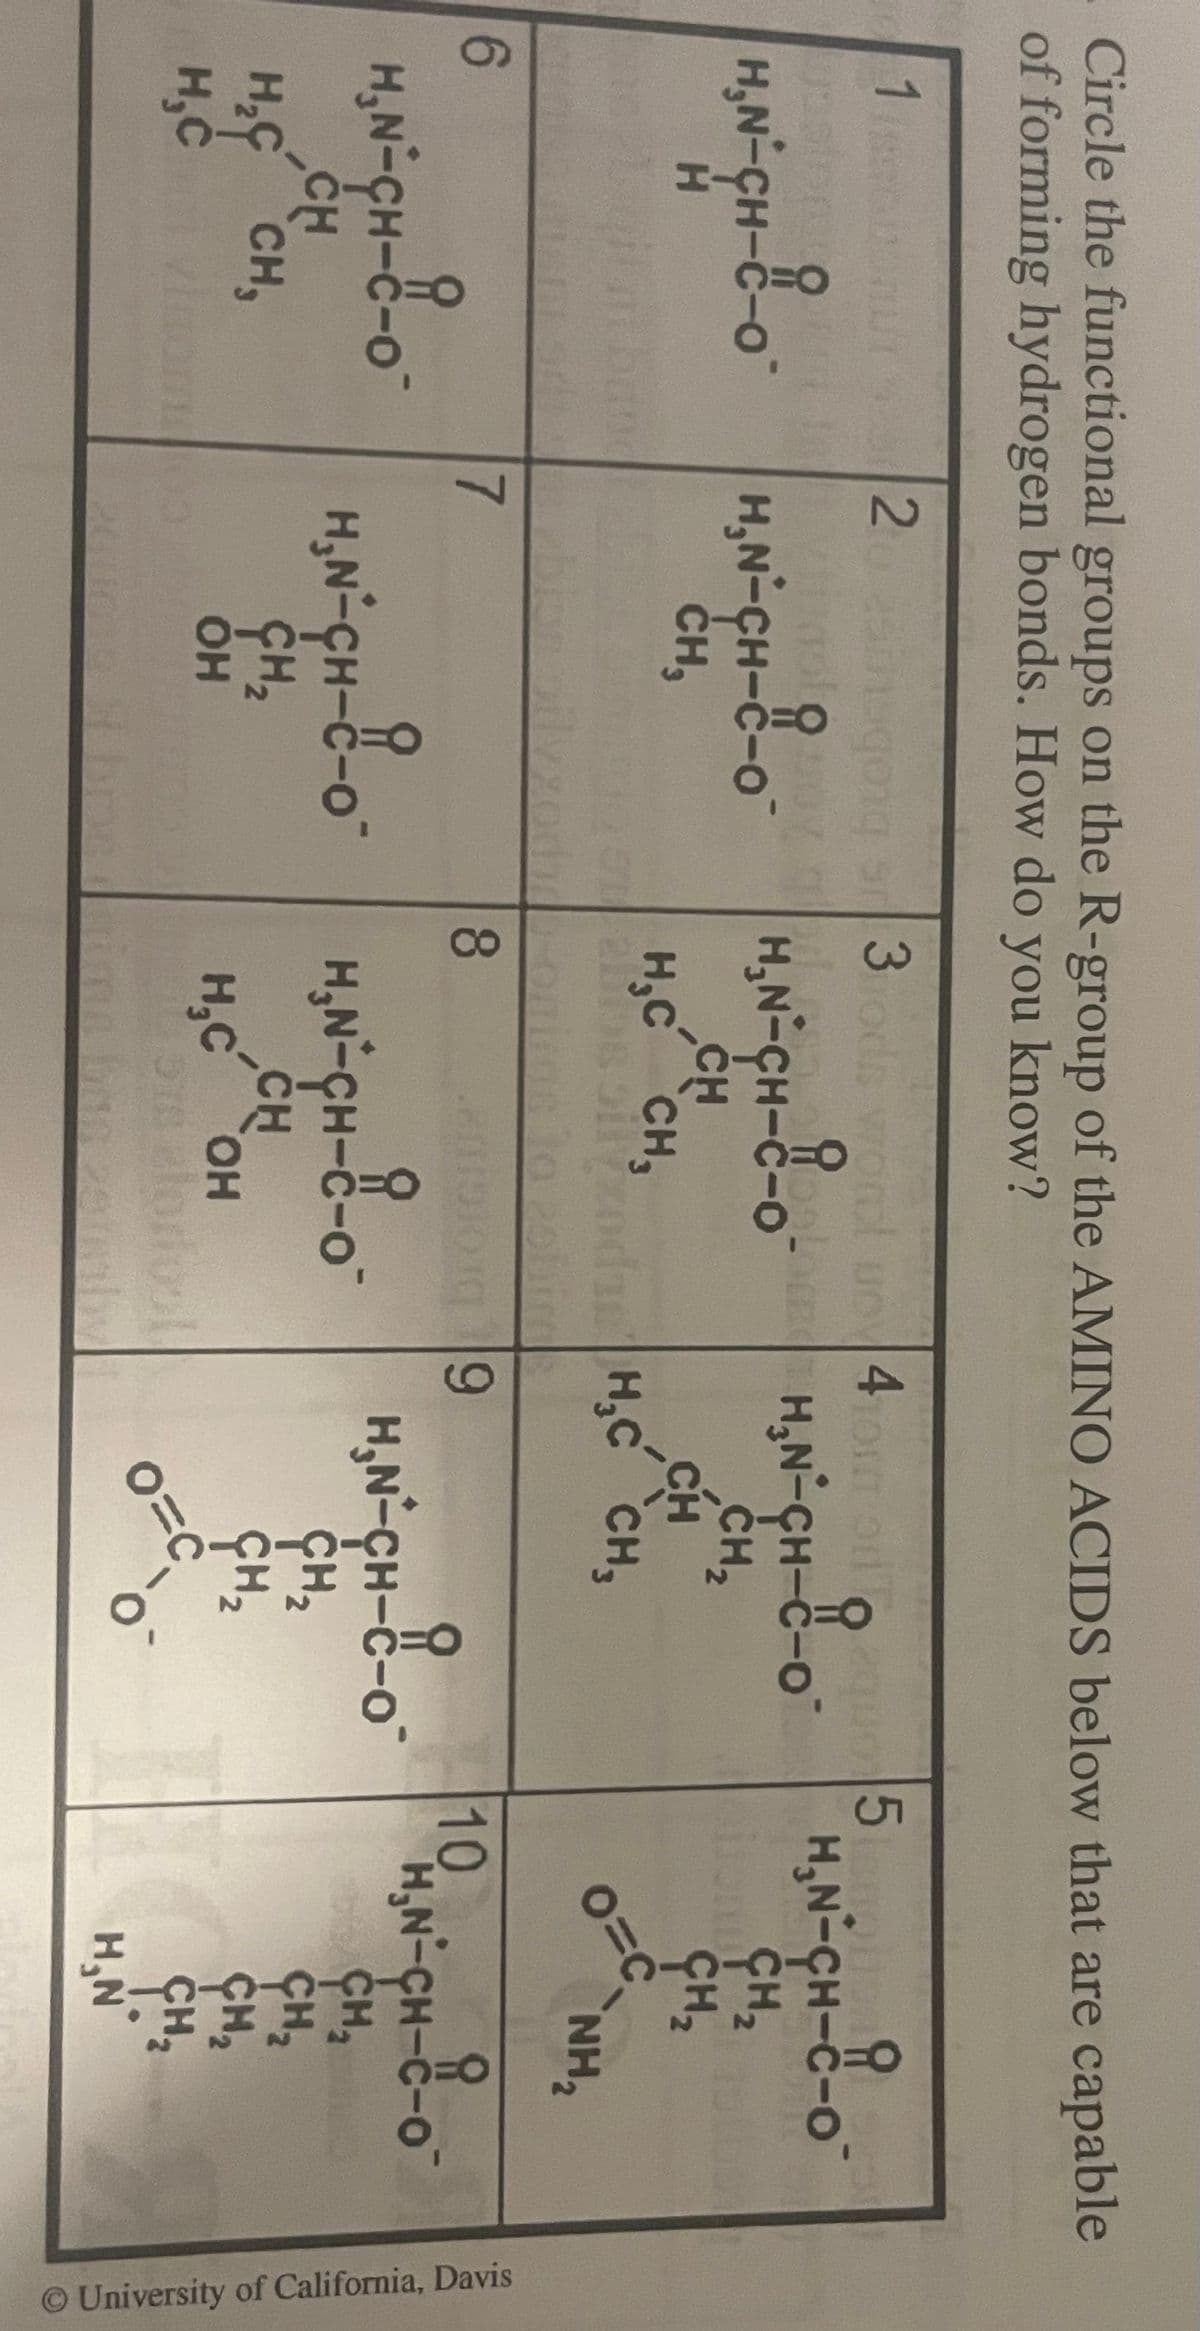 Circle the functional groups on the R-group of the AMINO ACIDS below that are capable
of forming hydrogen bonds. How do you know?
1
O
H₂N-CH-C-O
H
6
H₂N-CH-C-O
CH
H₂ CH₂
H₂C
2
요
H₂N-CH-C-O
CH,
7
ar 3 hods word no 4hom on oq
H₂N-CH-8-0-H₂N-CH-8-0 H₂N-CH-8-0-
CH₂
CH₂
H₂C
201
8
CH₂
CH
CH
CH₂
sizoda H₂C CH₂
10. Birds
9
H₂N-CH-8-0 H₂N-CH-8-0-
CH₂
OH
CH
H₂C OH
578 aloriool
H₂N-CH-C-O
CH₂
CH₂
0=C
o
5
0=c
NH₂
요
H₂N-CH-C-O
CH₂
CH₂
CH₂
CH ₂
10
H₂N
© University of California, Davis